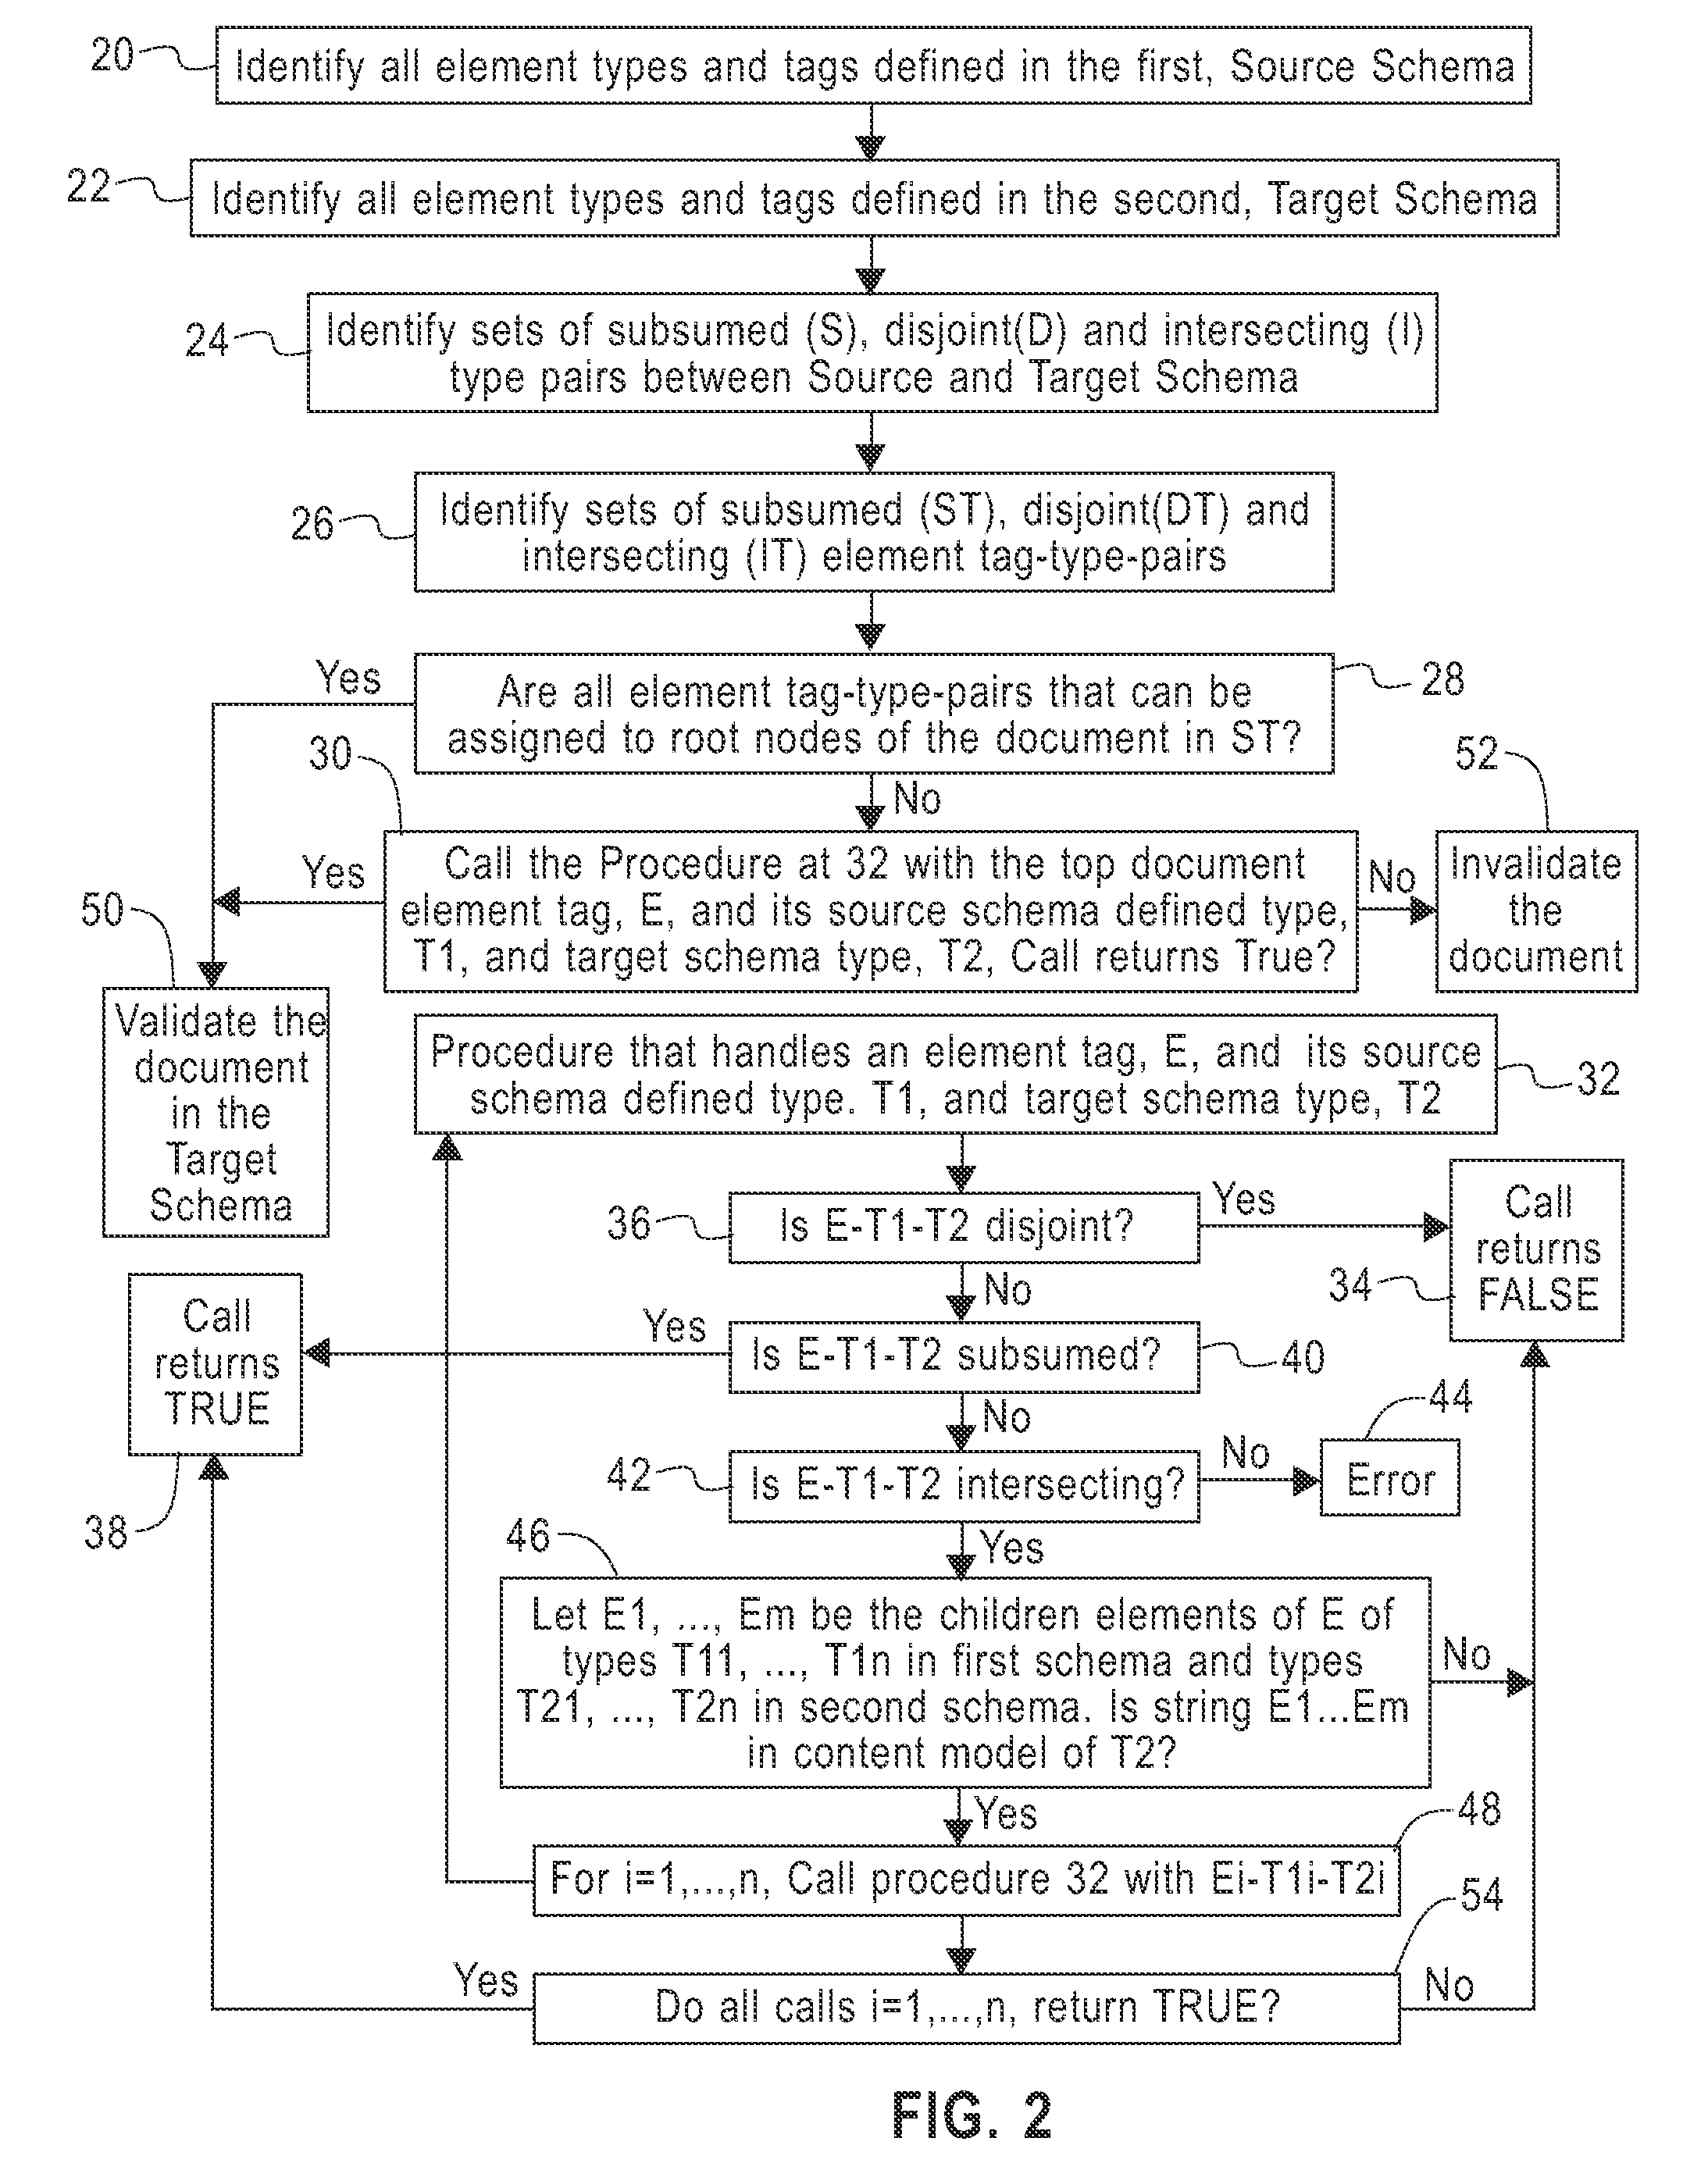 System for validating a document conforming to a first schema with respect to a second schema